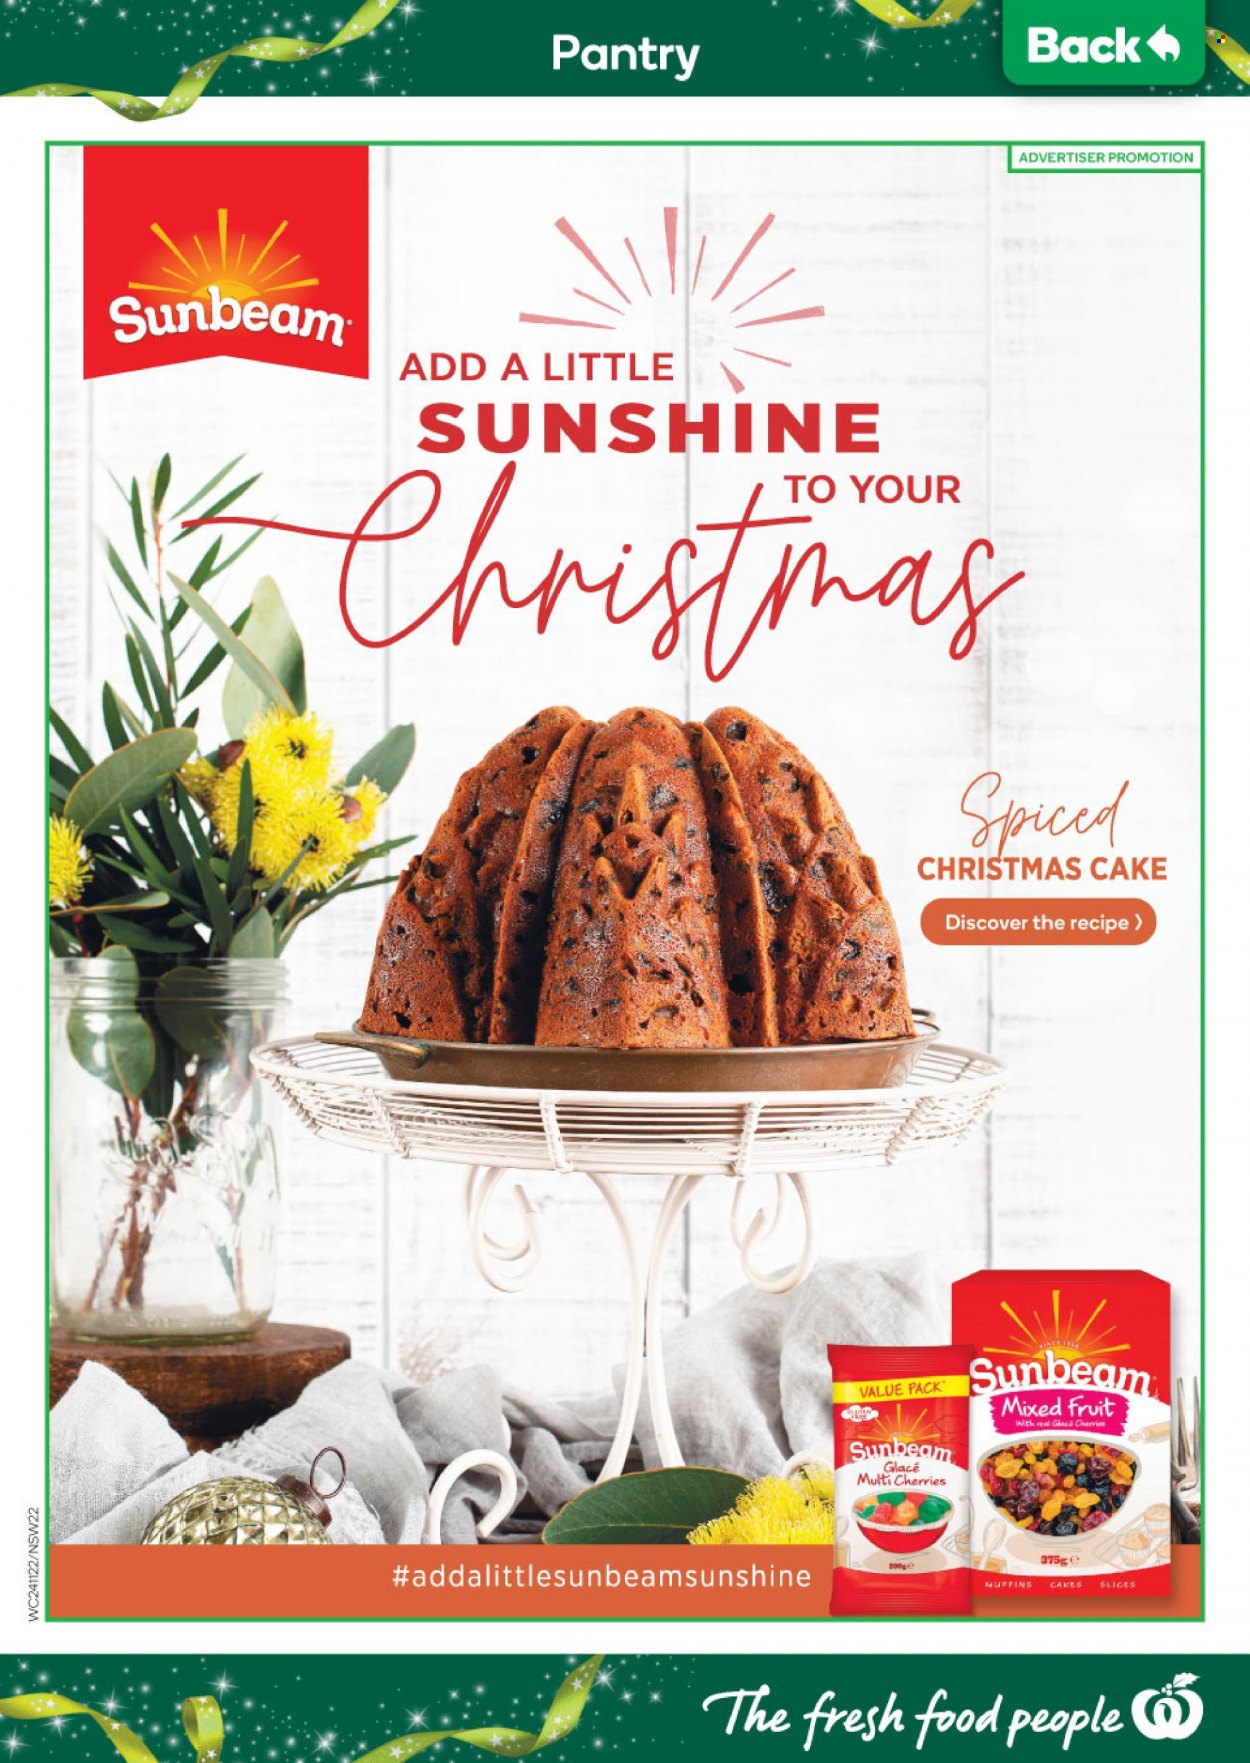 thumbnail - Woolworths Catalogue - 24 Nov 2021 - 30 Nov 2021 - Sales products - cake, christmas cake, muffin, cherries, Sunshine, Sunbeam. Page 22.